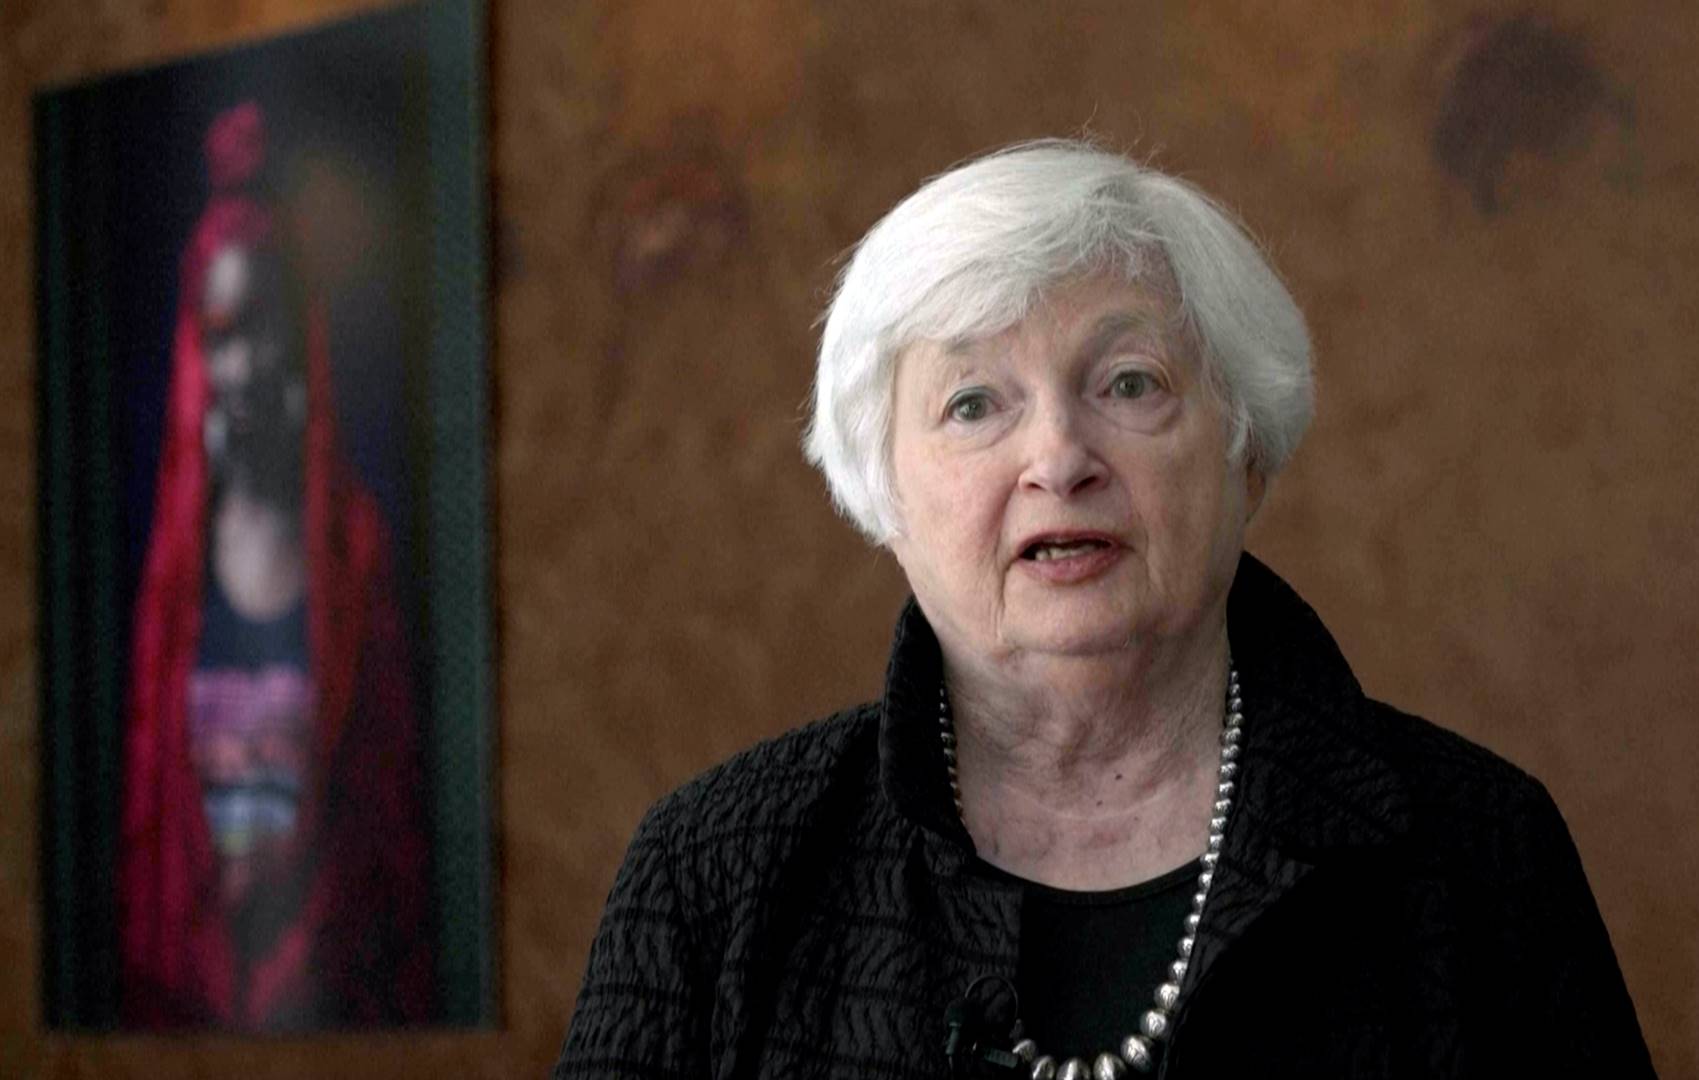 Yellen: Power cuts a 'considerable challenge', but strong fundamentals help SA's investment case